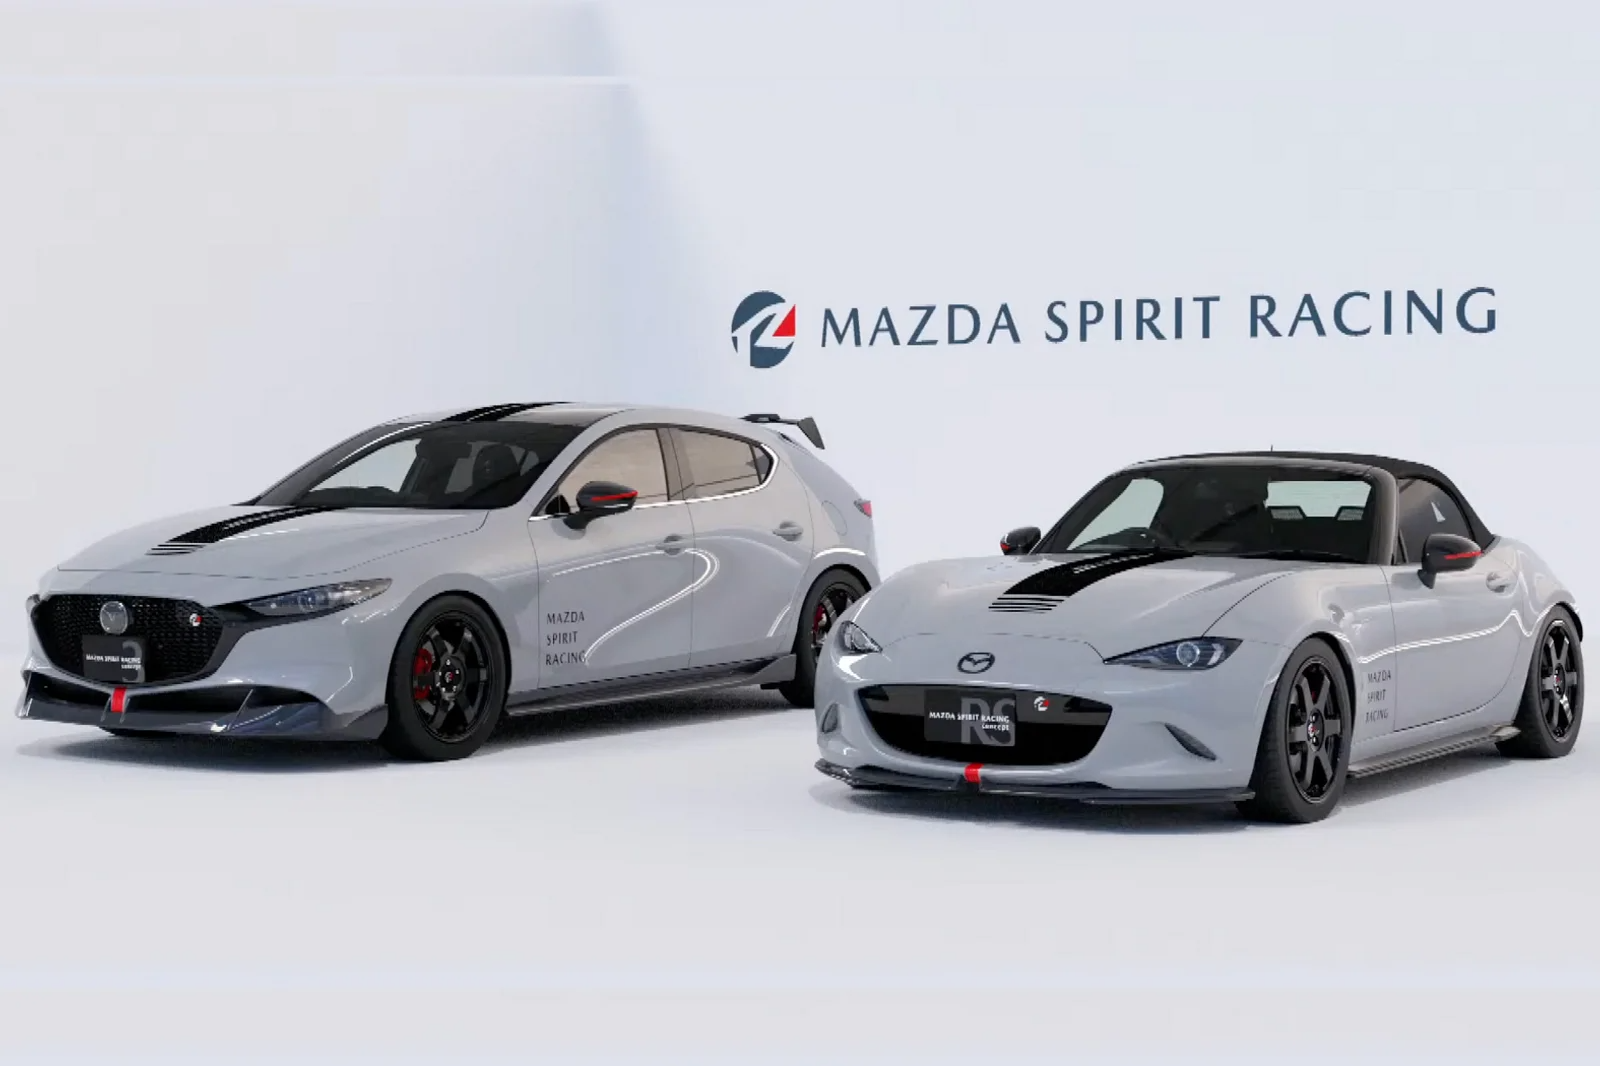 Mazda Will Get Its Mojo Back With Spirit Racing Sub-Brand